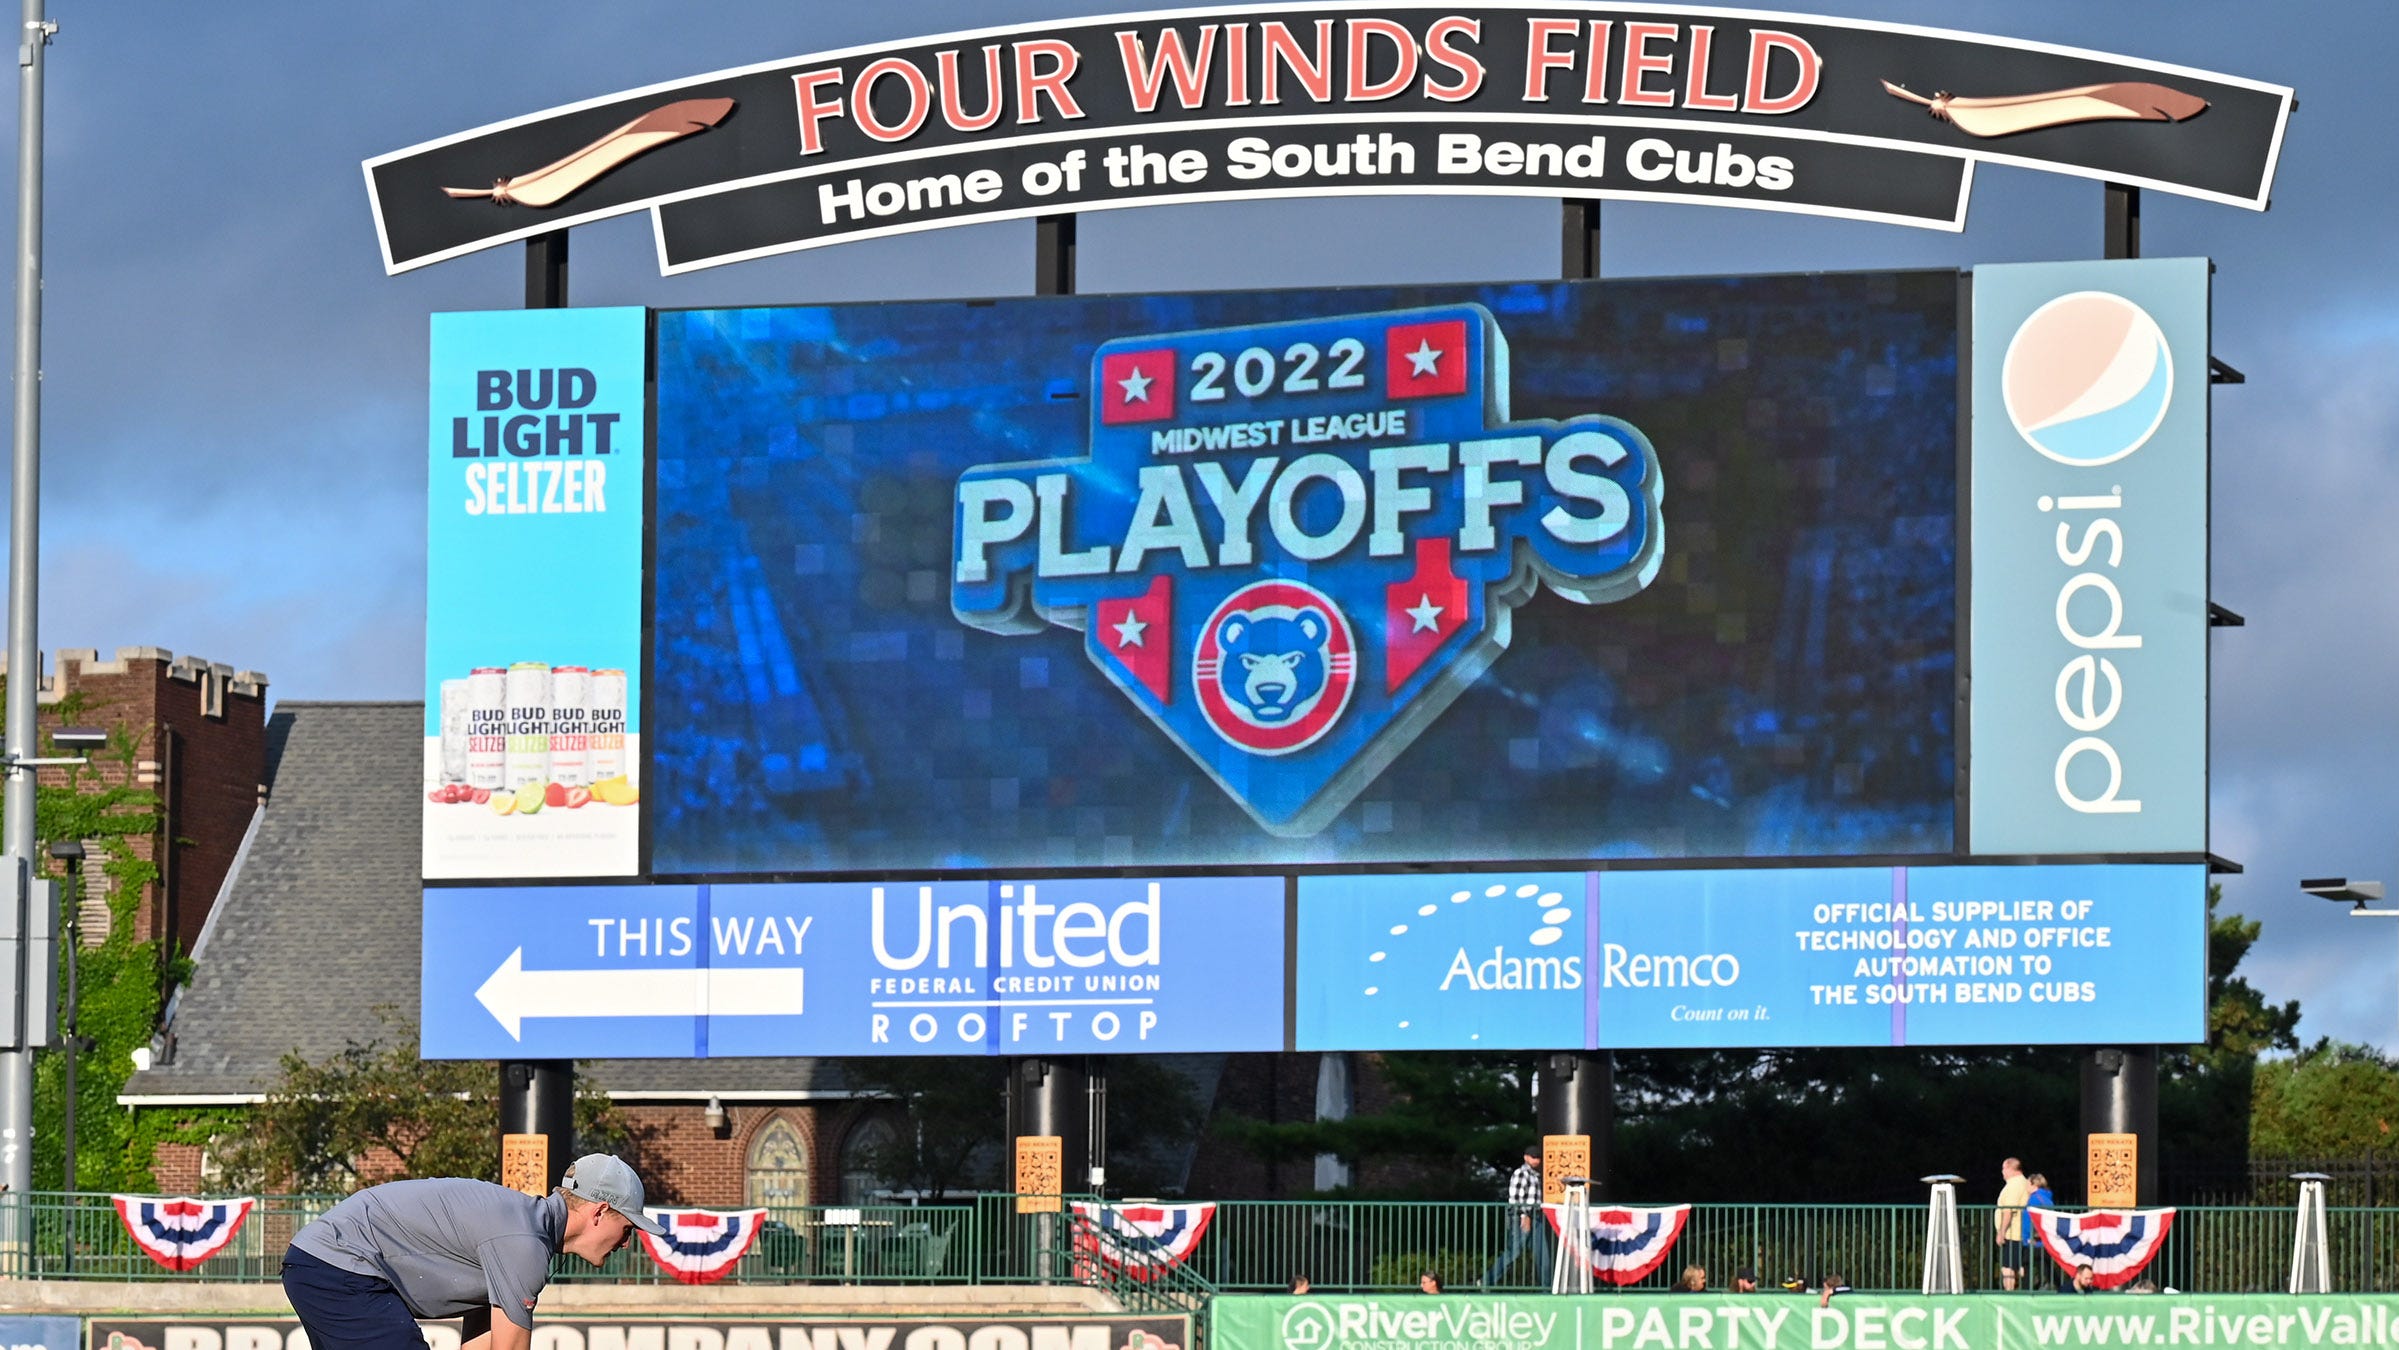 The South Bend Cubs lost in playoff action Thursday night